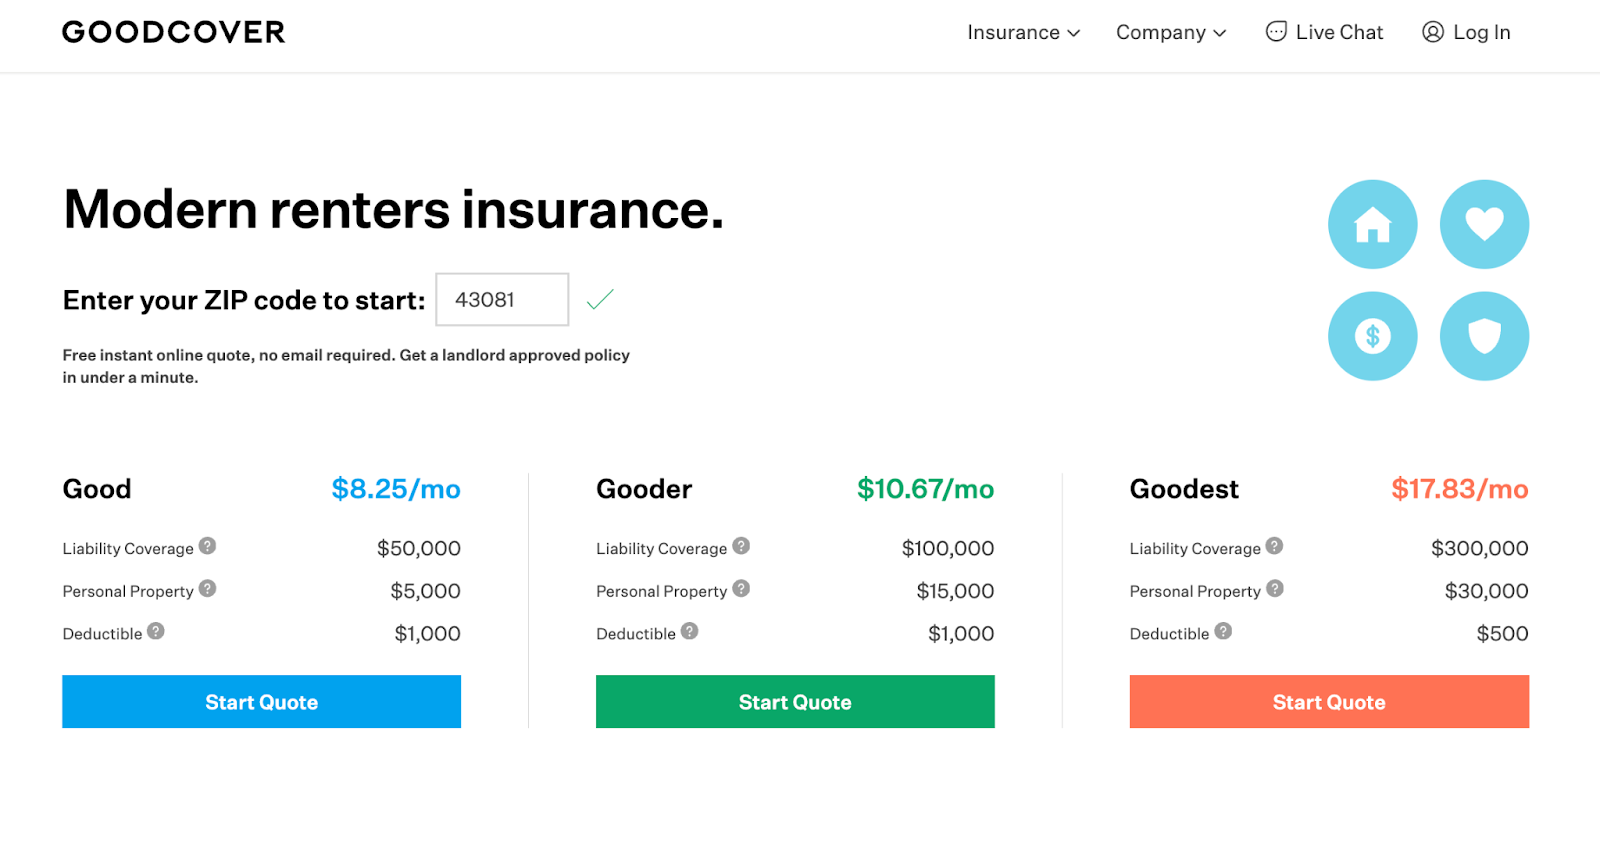 Goodcover’s Complete Guide to Renters Insurance in Columbus, Ohio